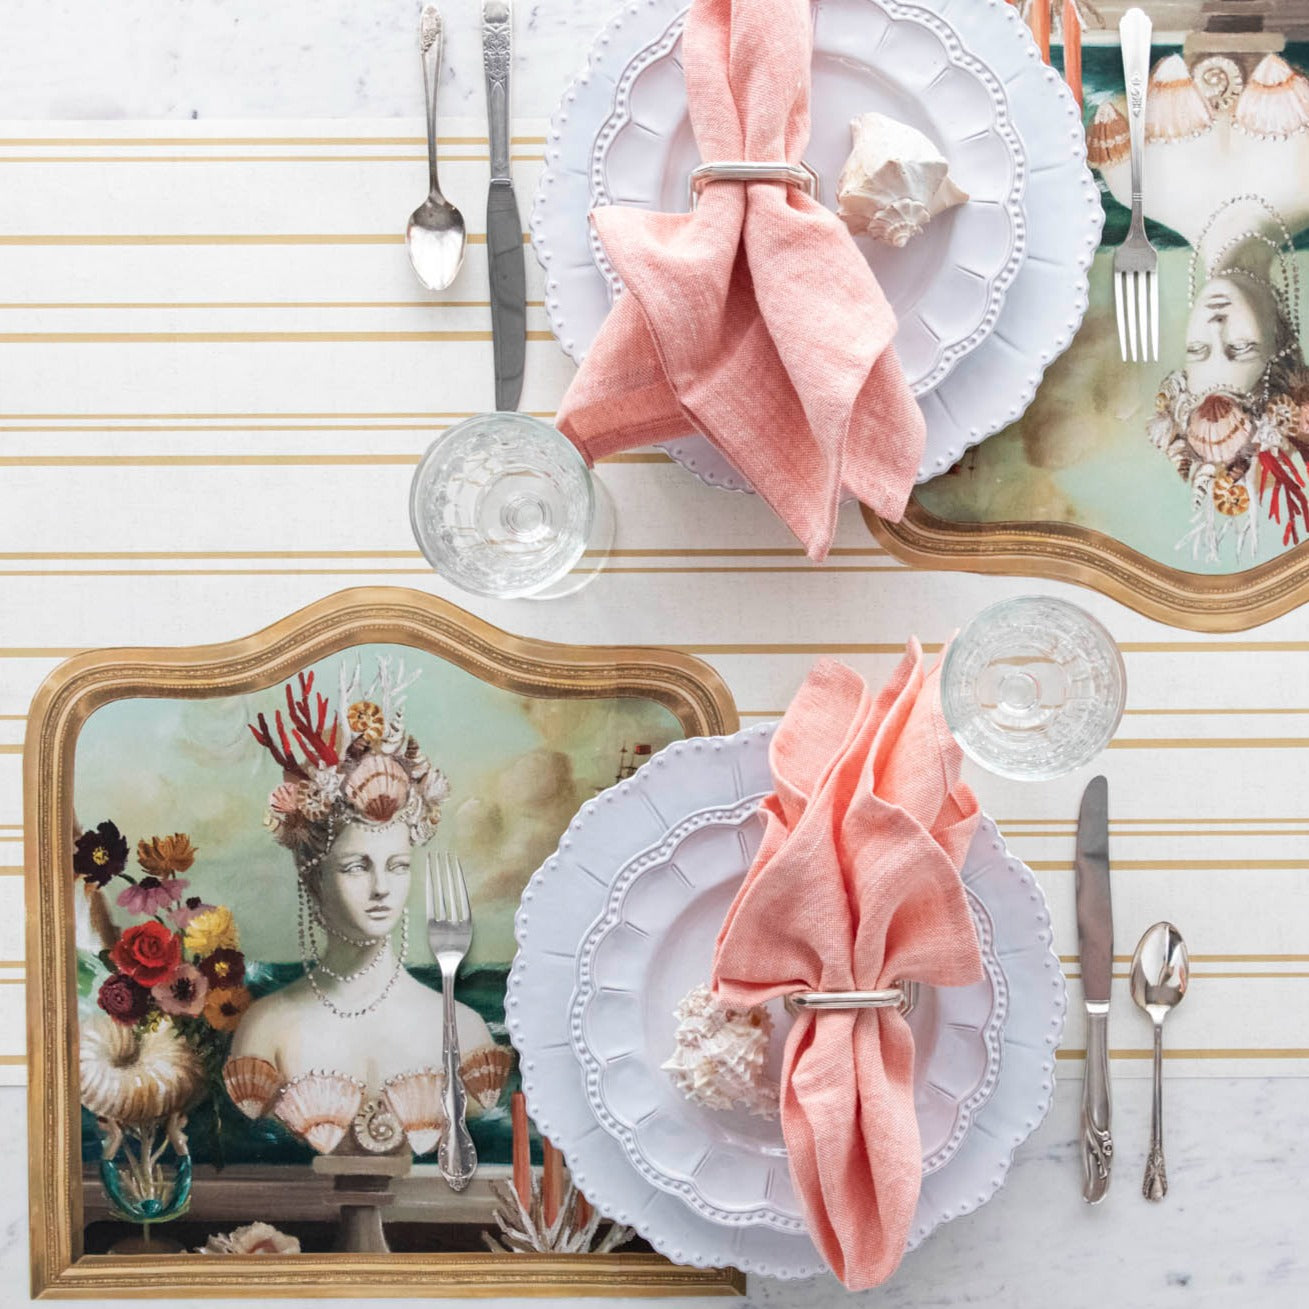 The Die-cut Goddess of the Sea Placemat under an elegant table setting for two, from above.